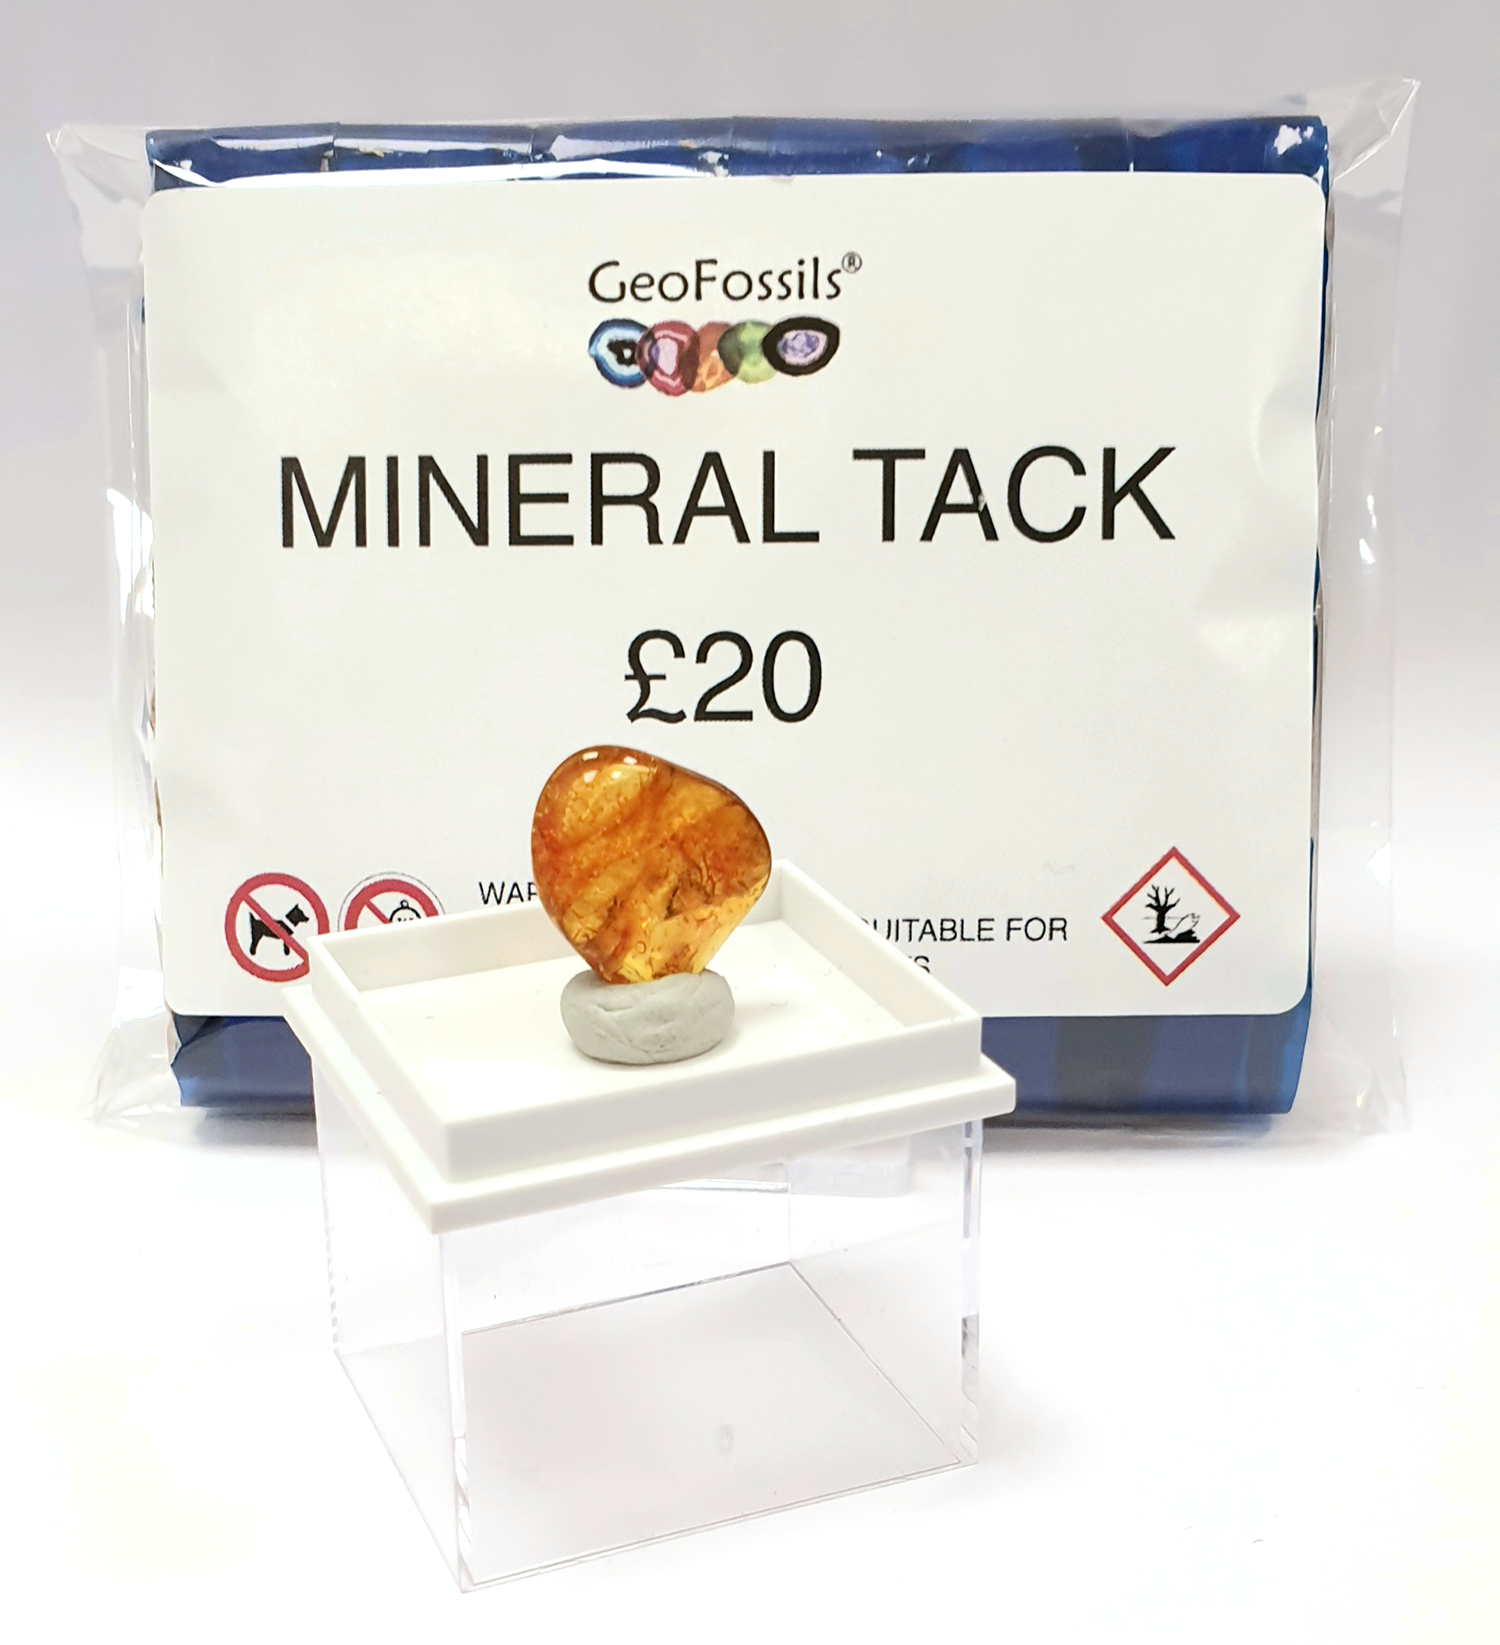 Mineral Tack by GeoFossils